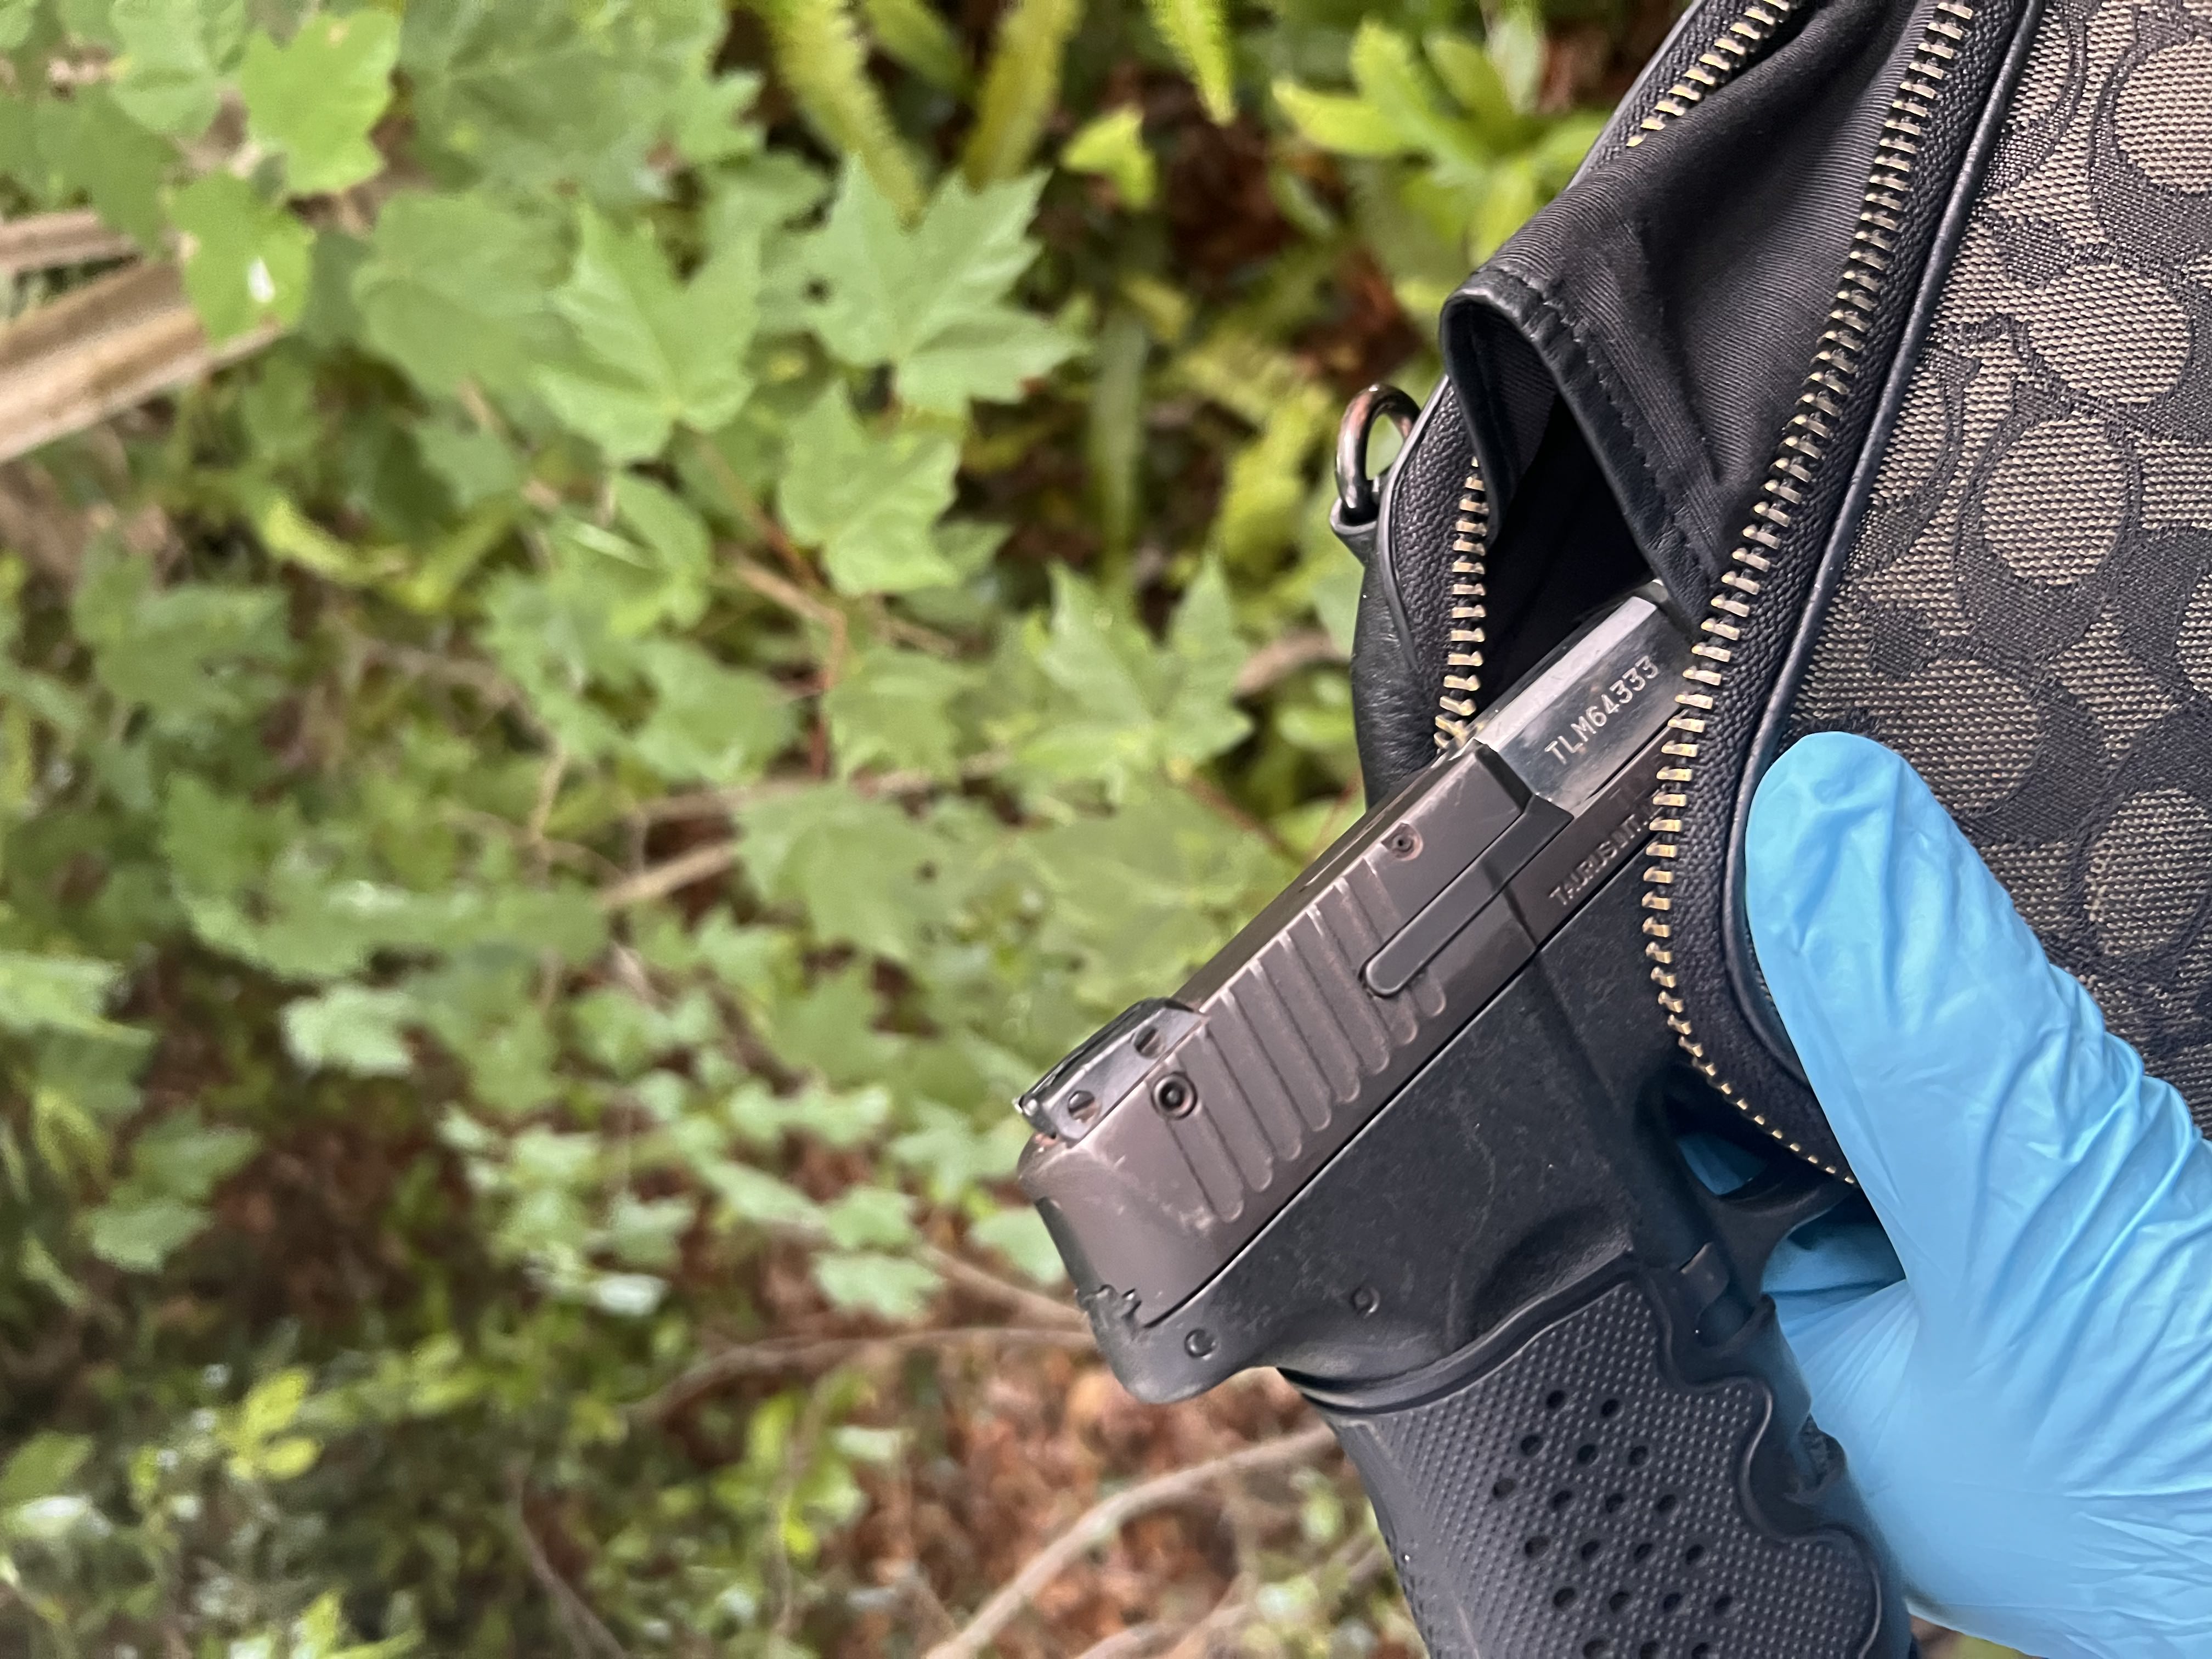 Deputies found the gun used in the incident, along with a black ski mask and black hoodie